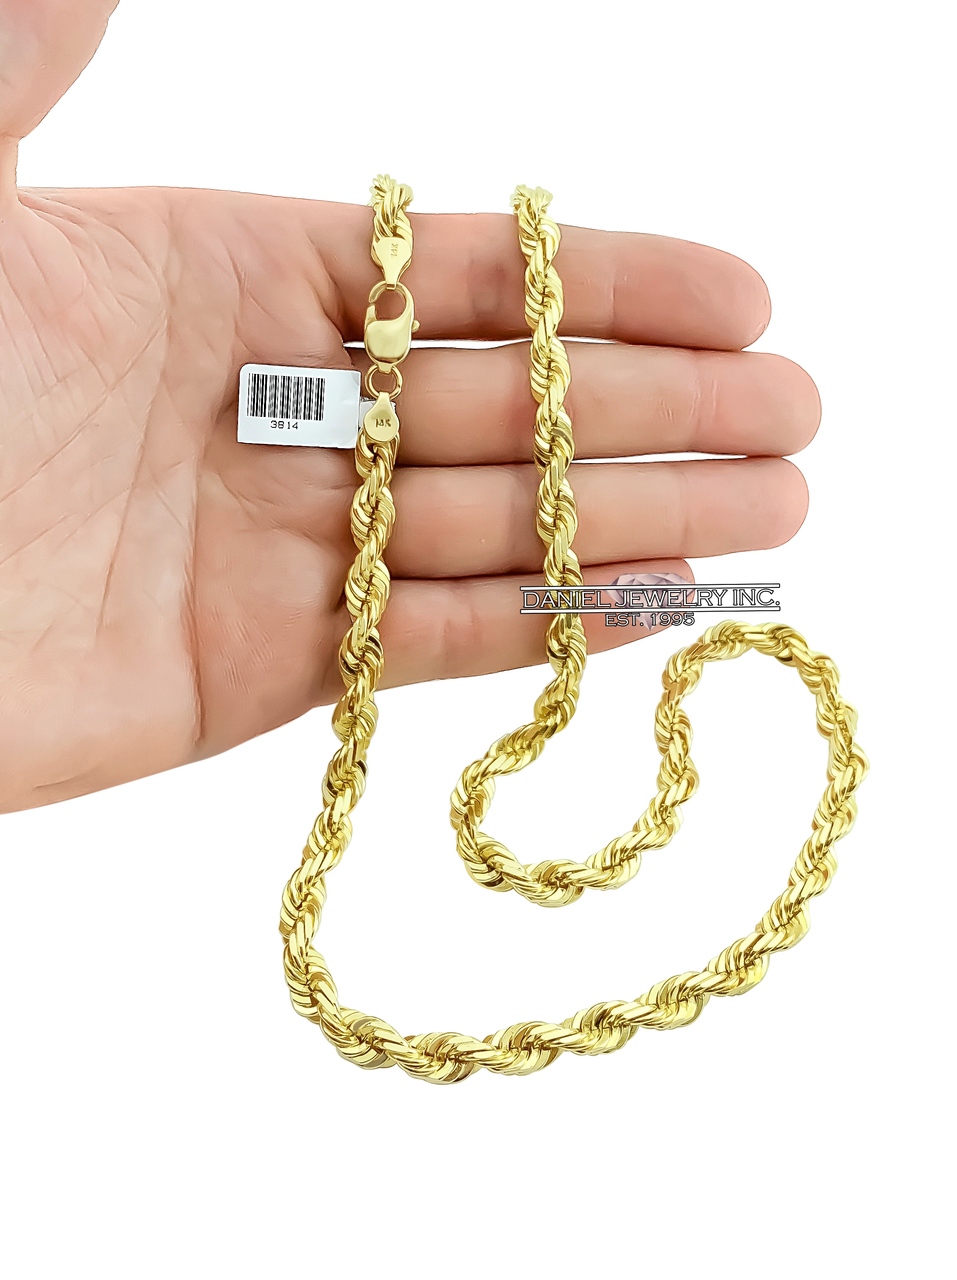 14K 6mm Solid Yellow Gold Rope Chain. Classic Rope Chain. Mens Gold Chain.